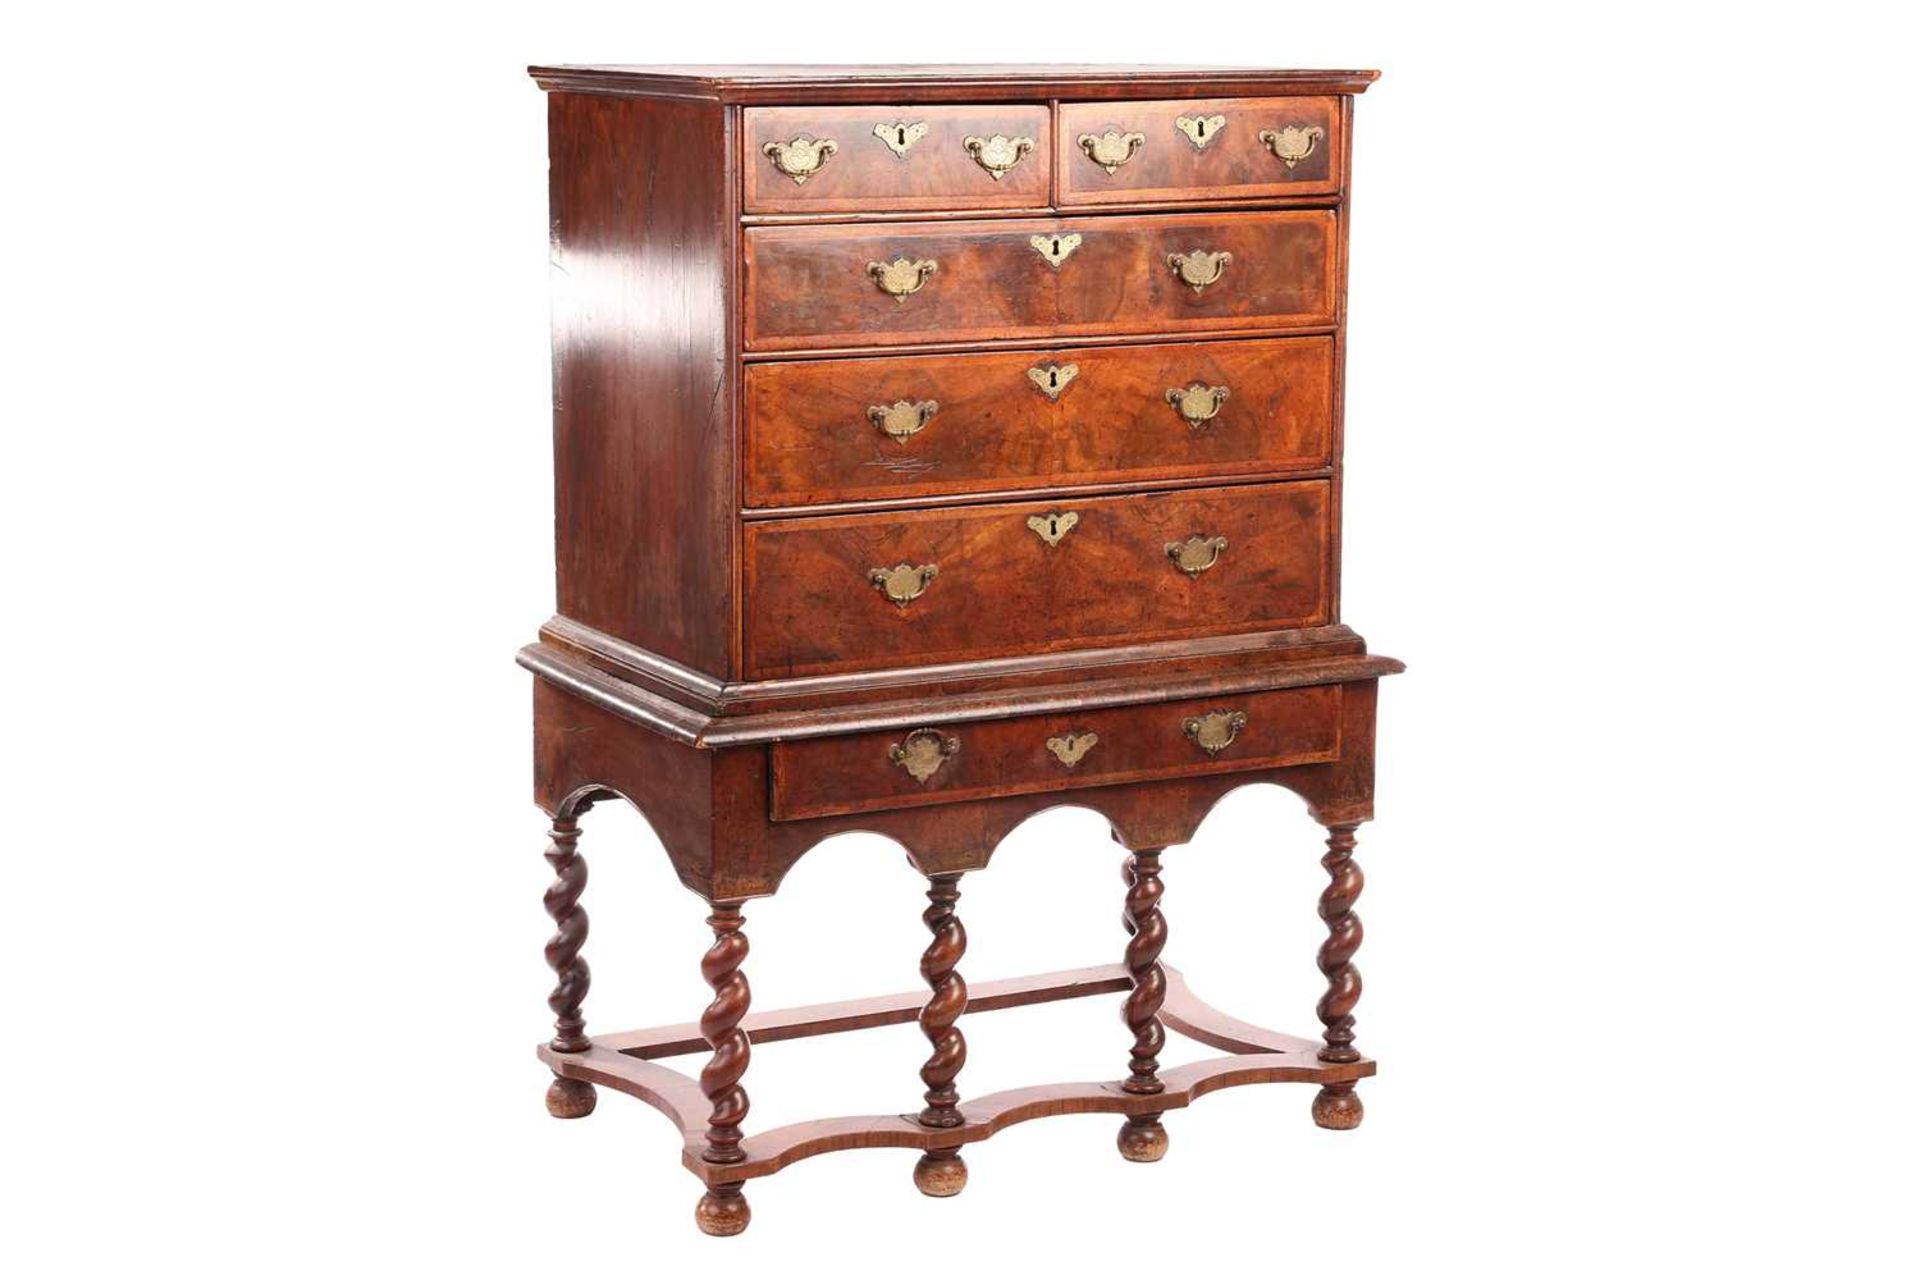 A 17th-century and later figured walnut chest on stand, the upper section with quarter veneered top  - Image 7 of 22